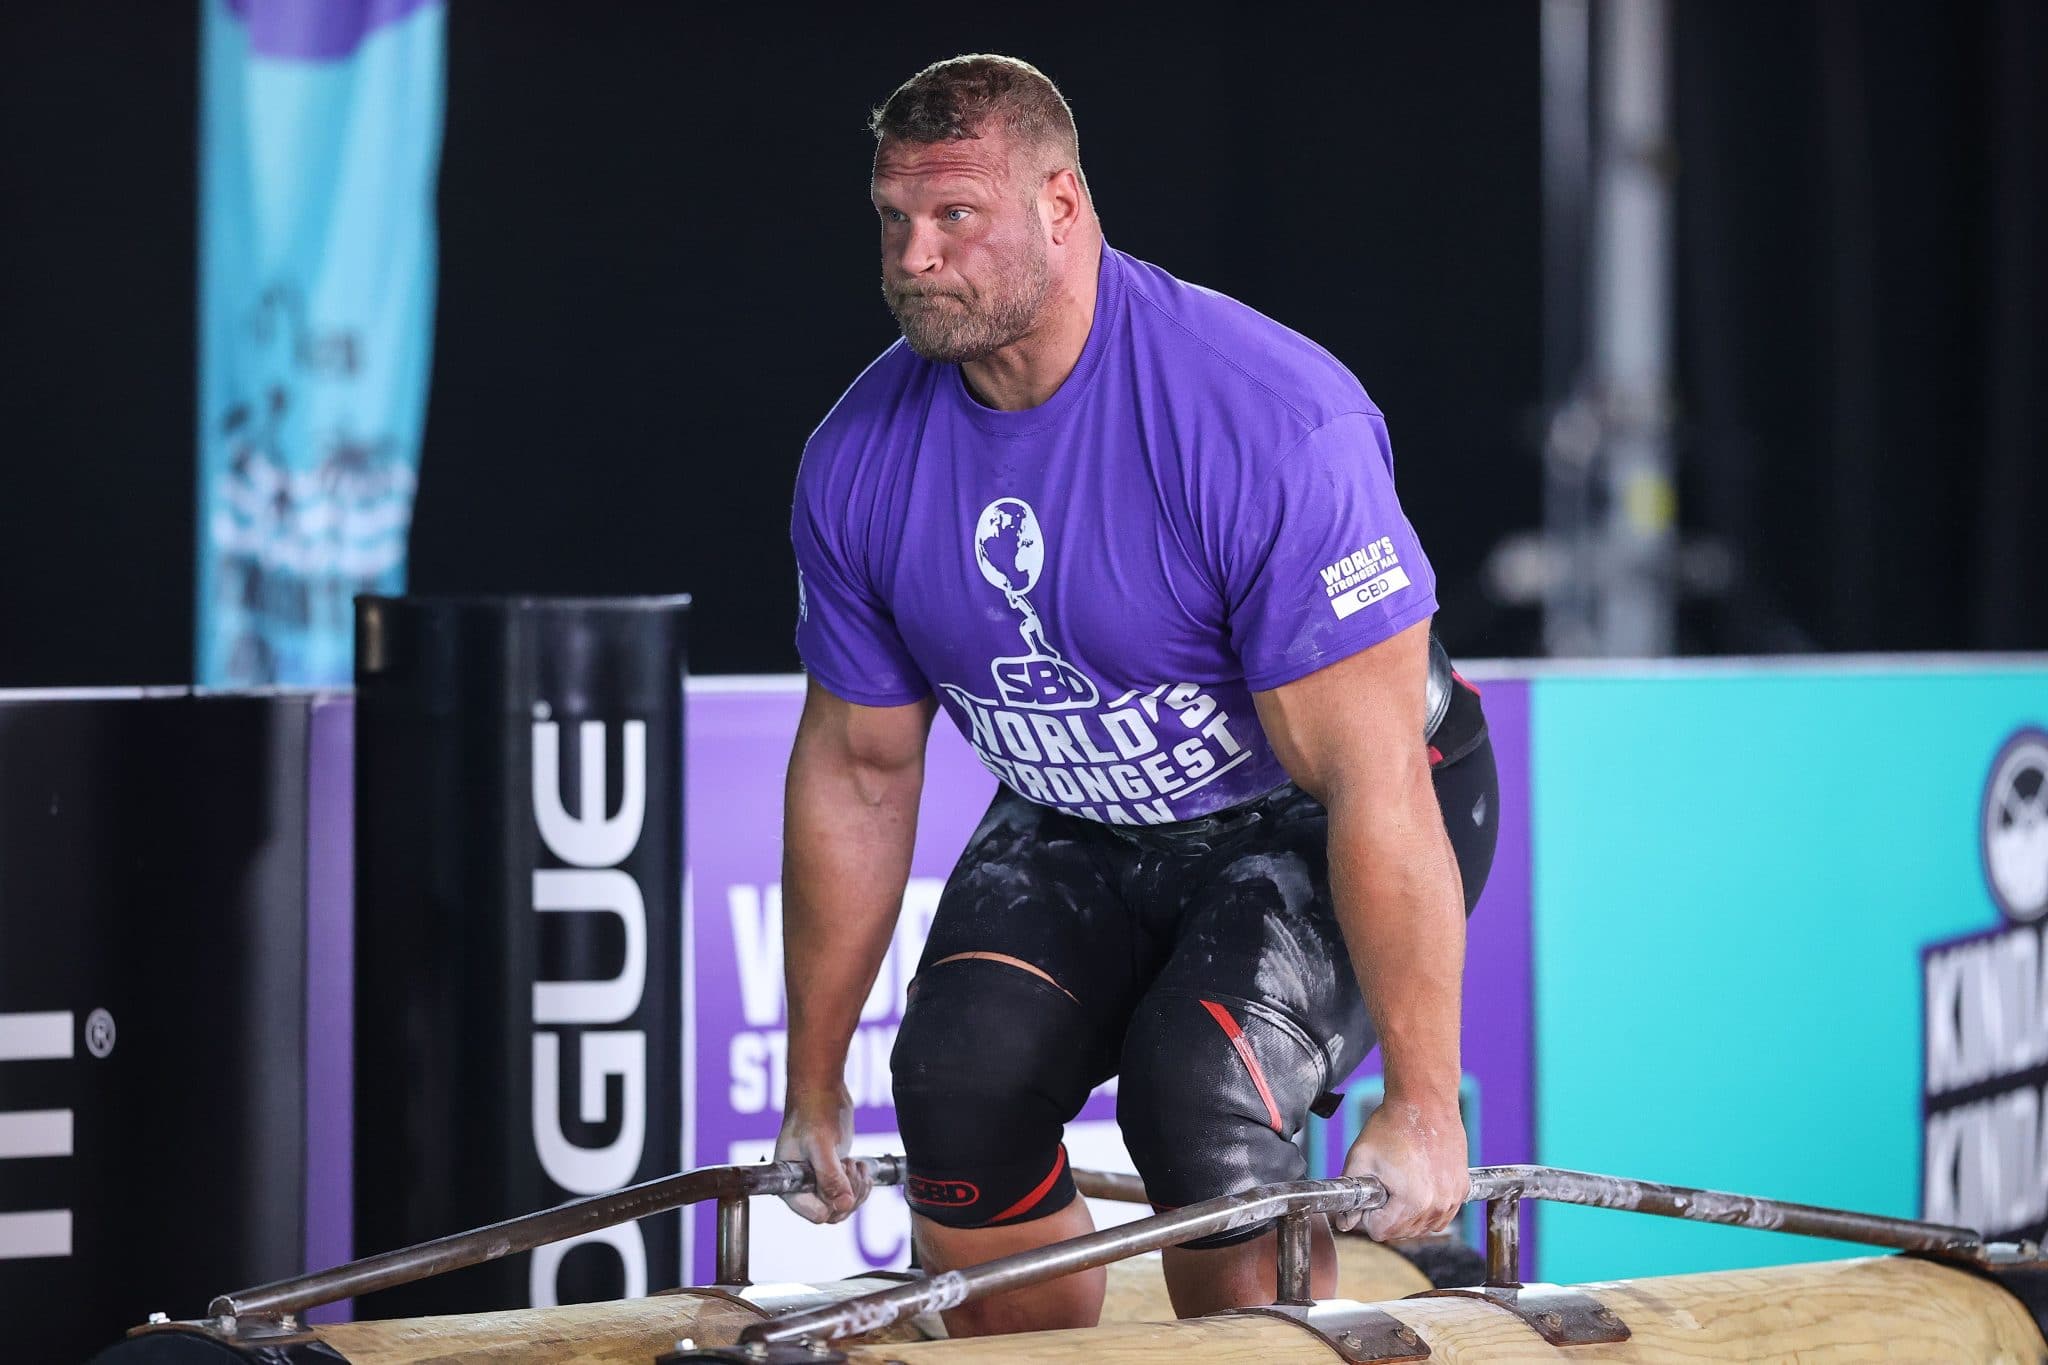 World's Strongest Man 2020 Day One Results and Recap